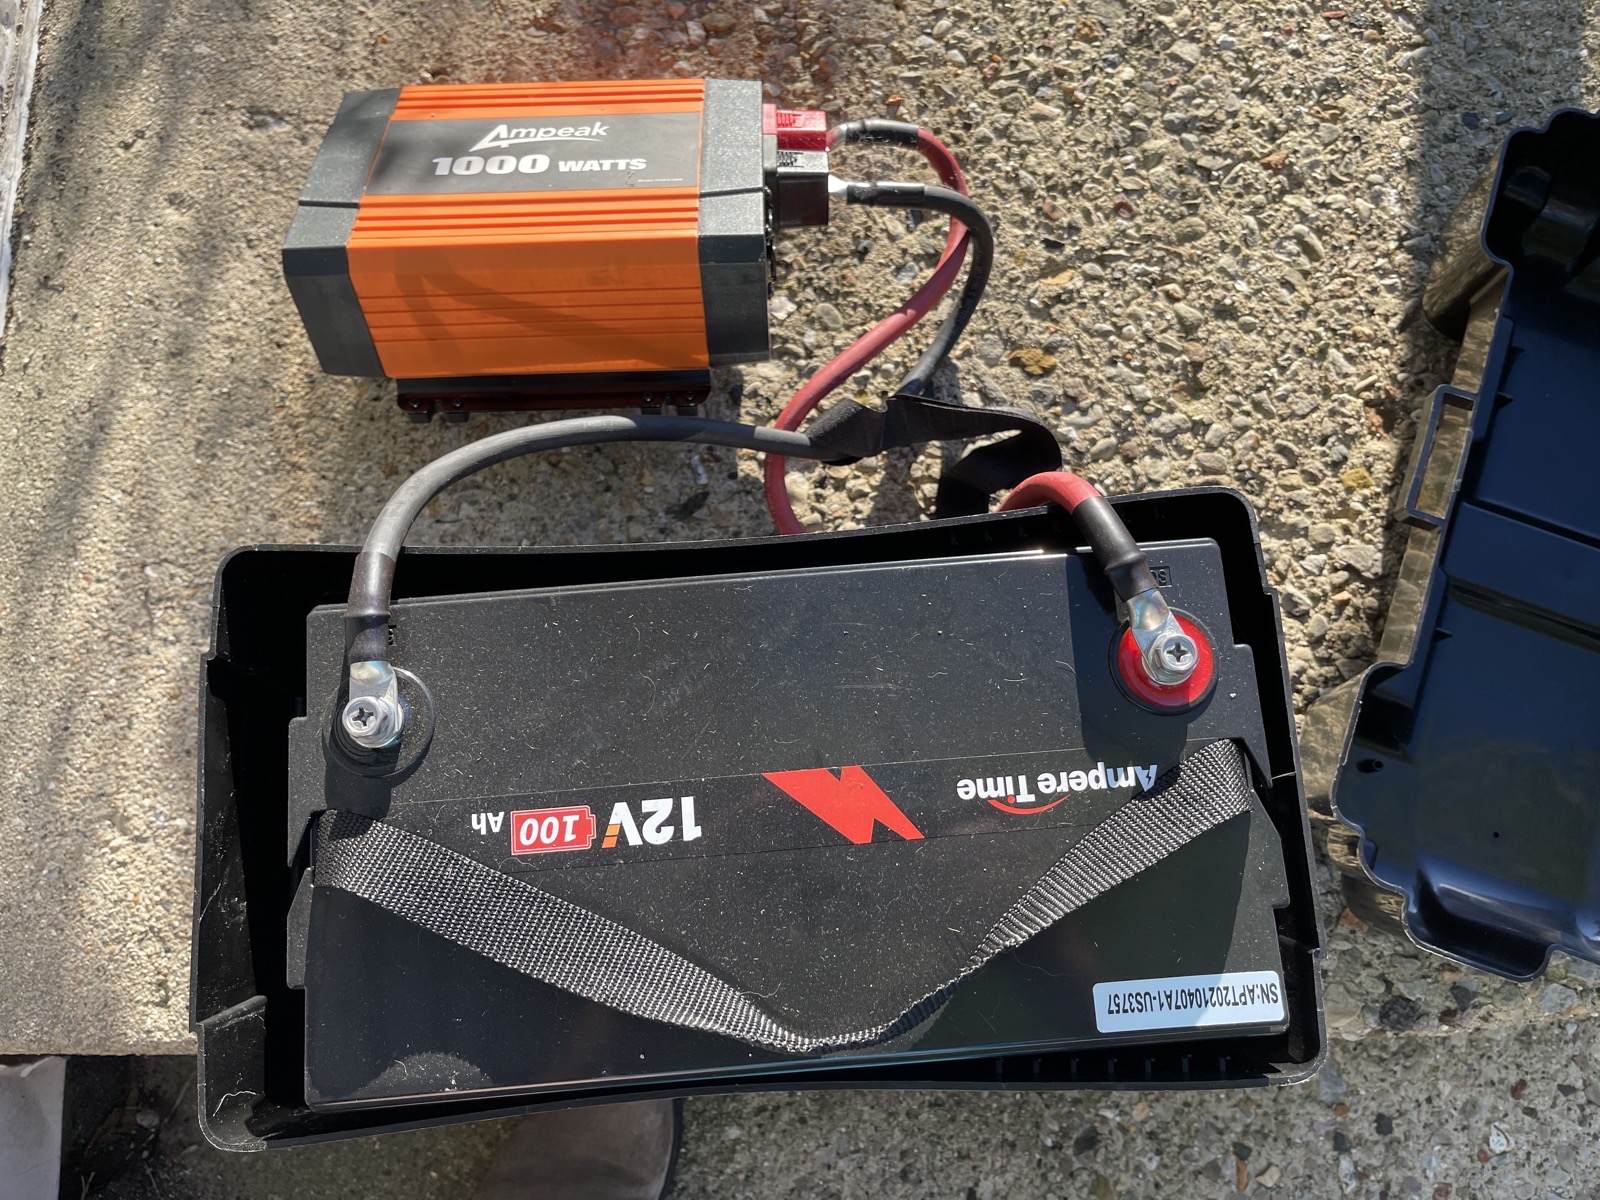 12V Battery with two leads going to the Ampeak 1000 Watt inverter box